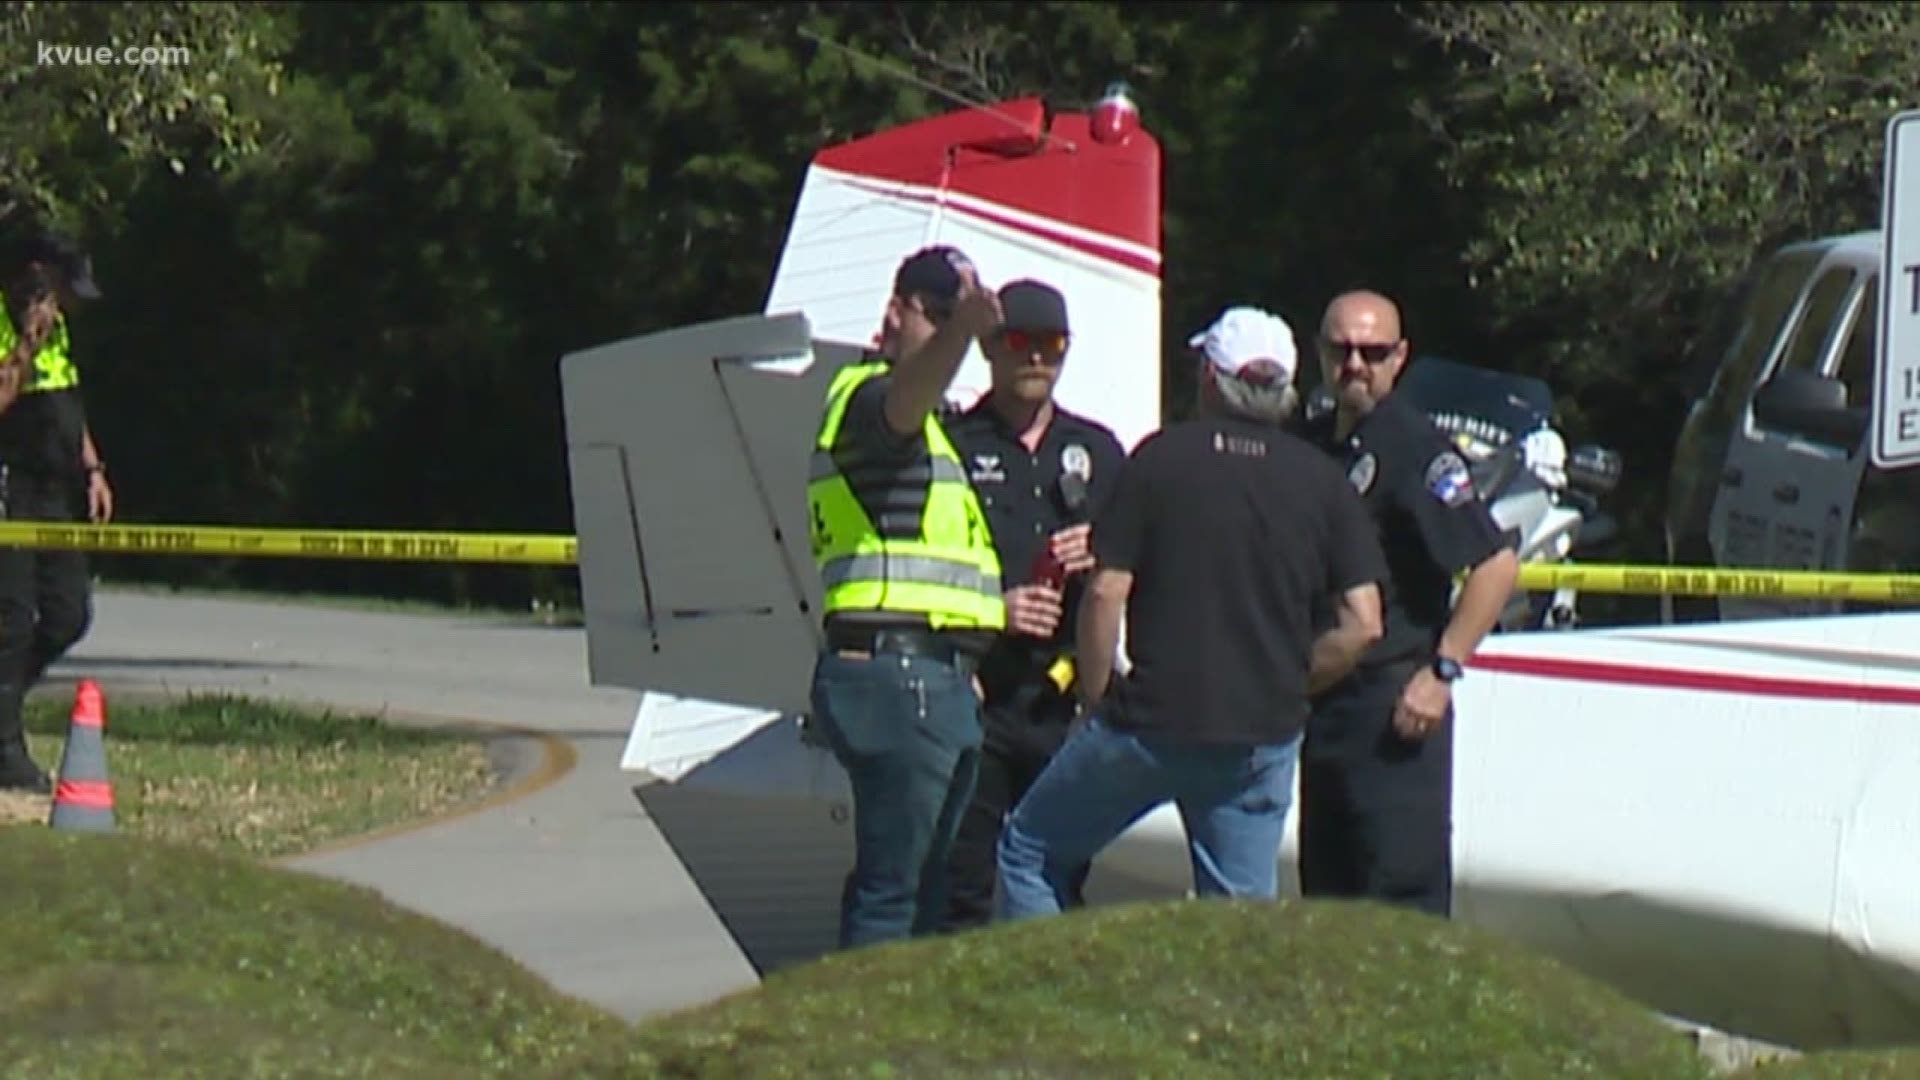 A small plane all of a sudden crashed near houses in a busy Lakeway neighborhood, yards from the runway.